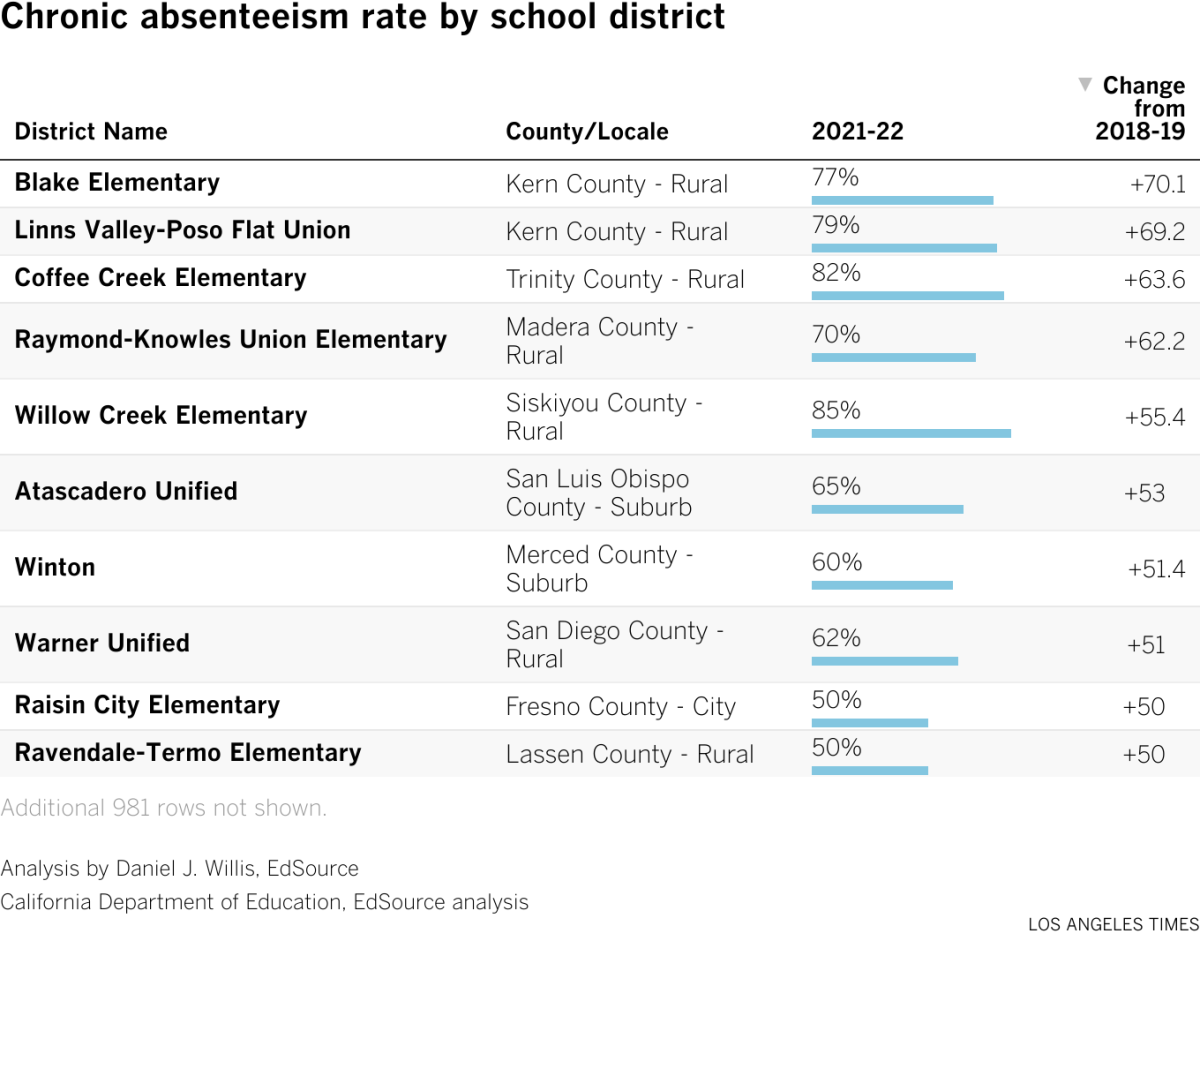 Chronic absenteeism rate by school district